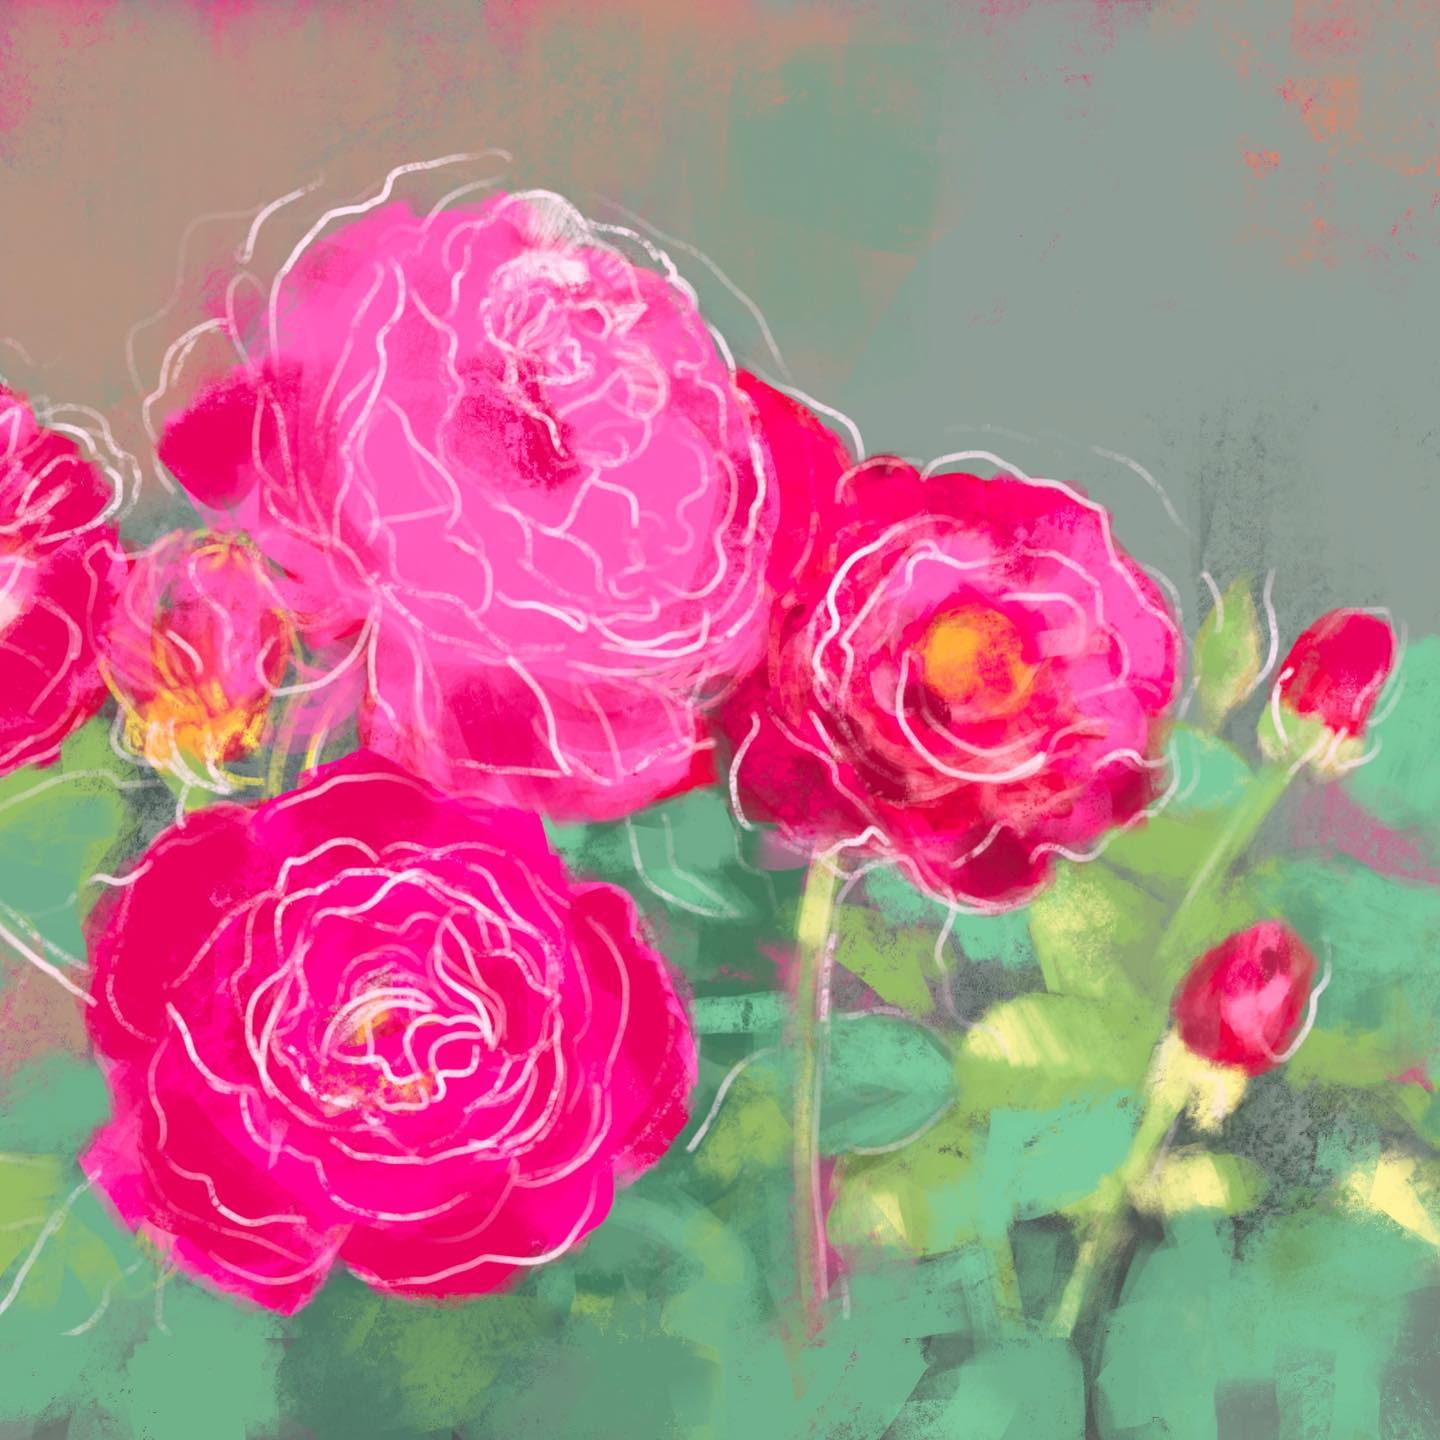 Spring on my mind! 

It’s a cold snowy day here today, so thought of painting some colorful roses on my iPad! 

Painted from a picture I took at my sister’s backyard when I  visited her last summer :)